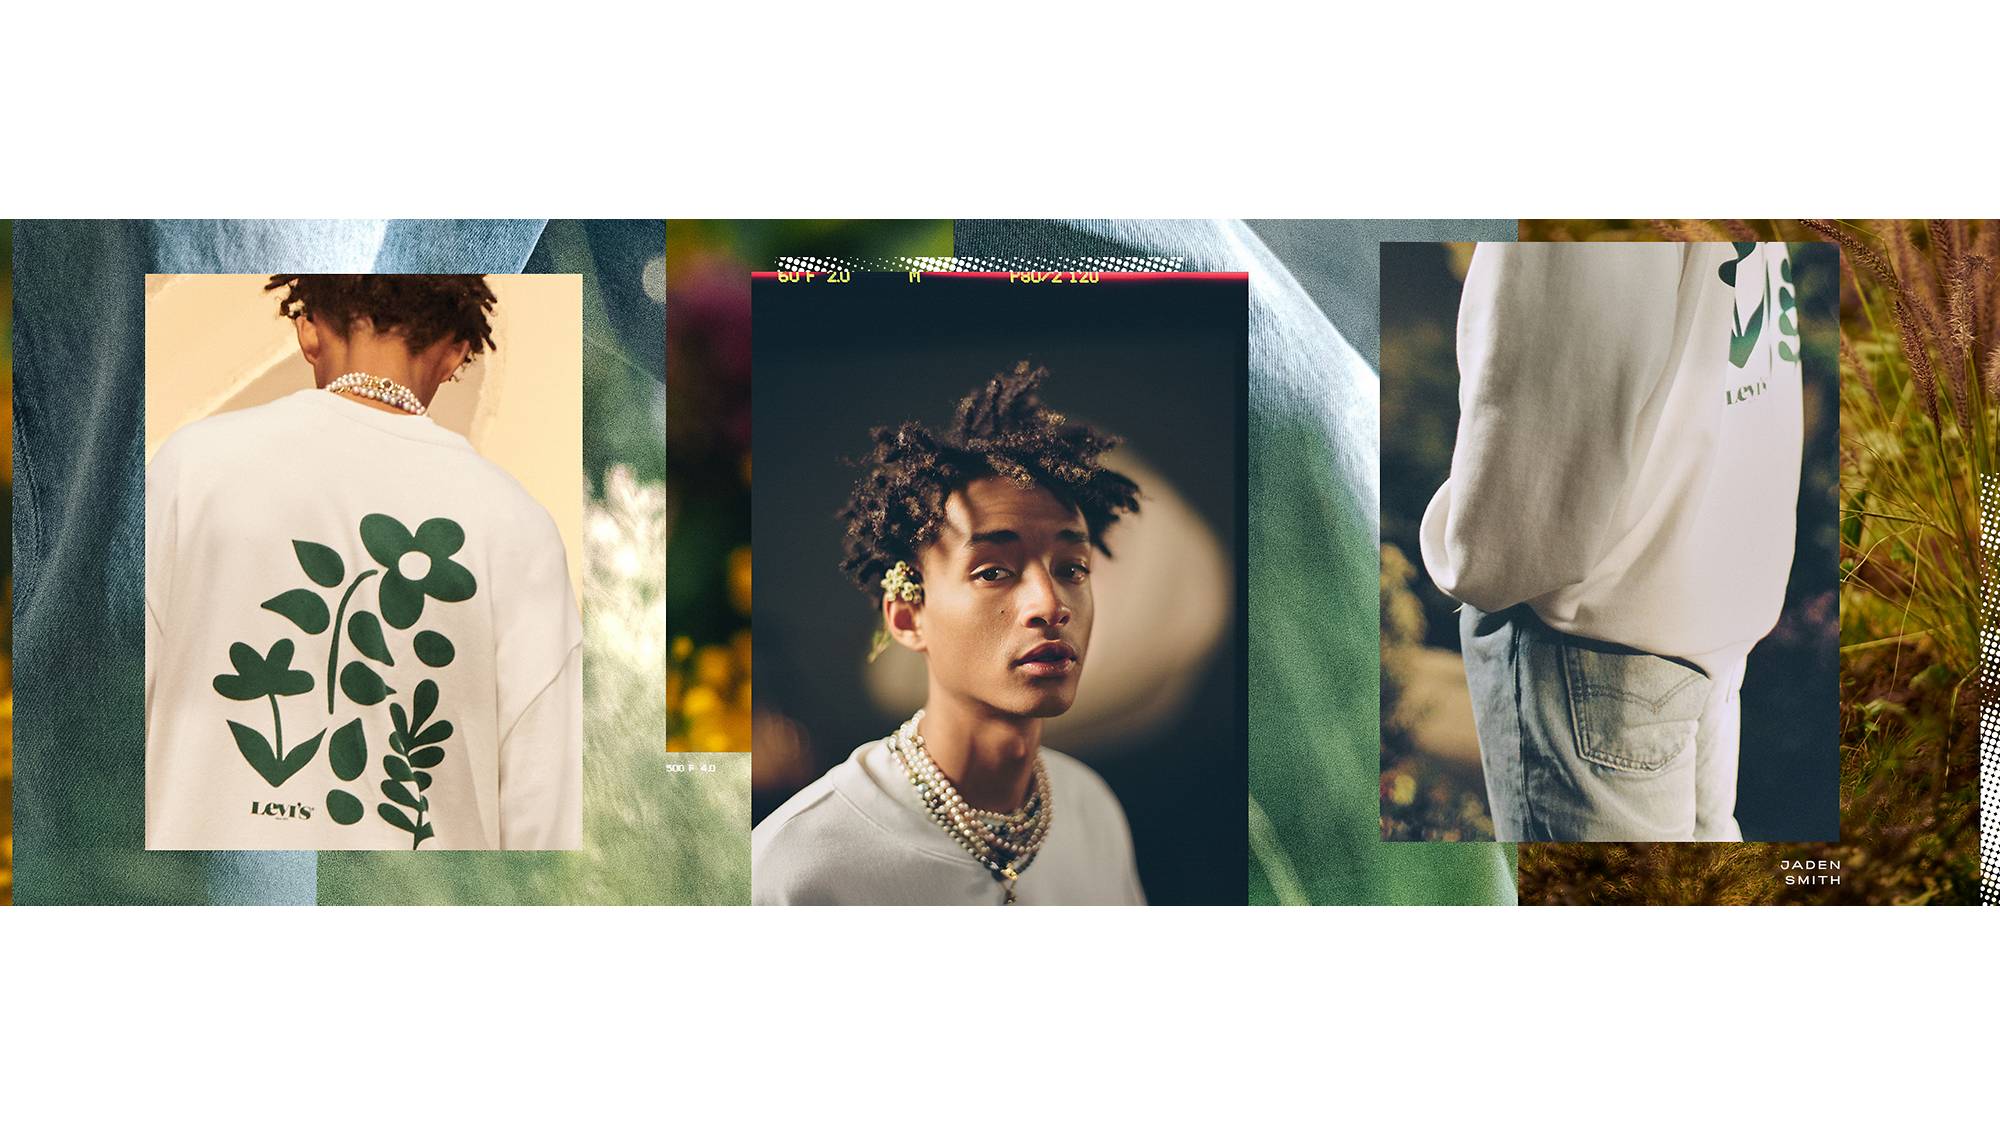 Three images of Jaden Smith in head-to-toe Levi's® clothing. The left image is of the floral design on the back of the long-sleeve cream tee shirt Jaden is wearing. The middle image is a close-up shot of Jaden with a flower on his ear. The right image is of Jaden's jeans.